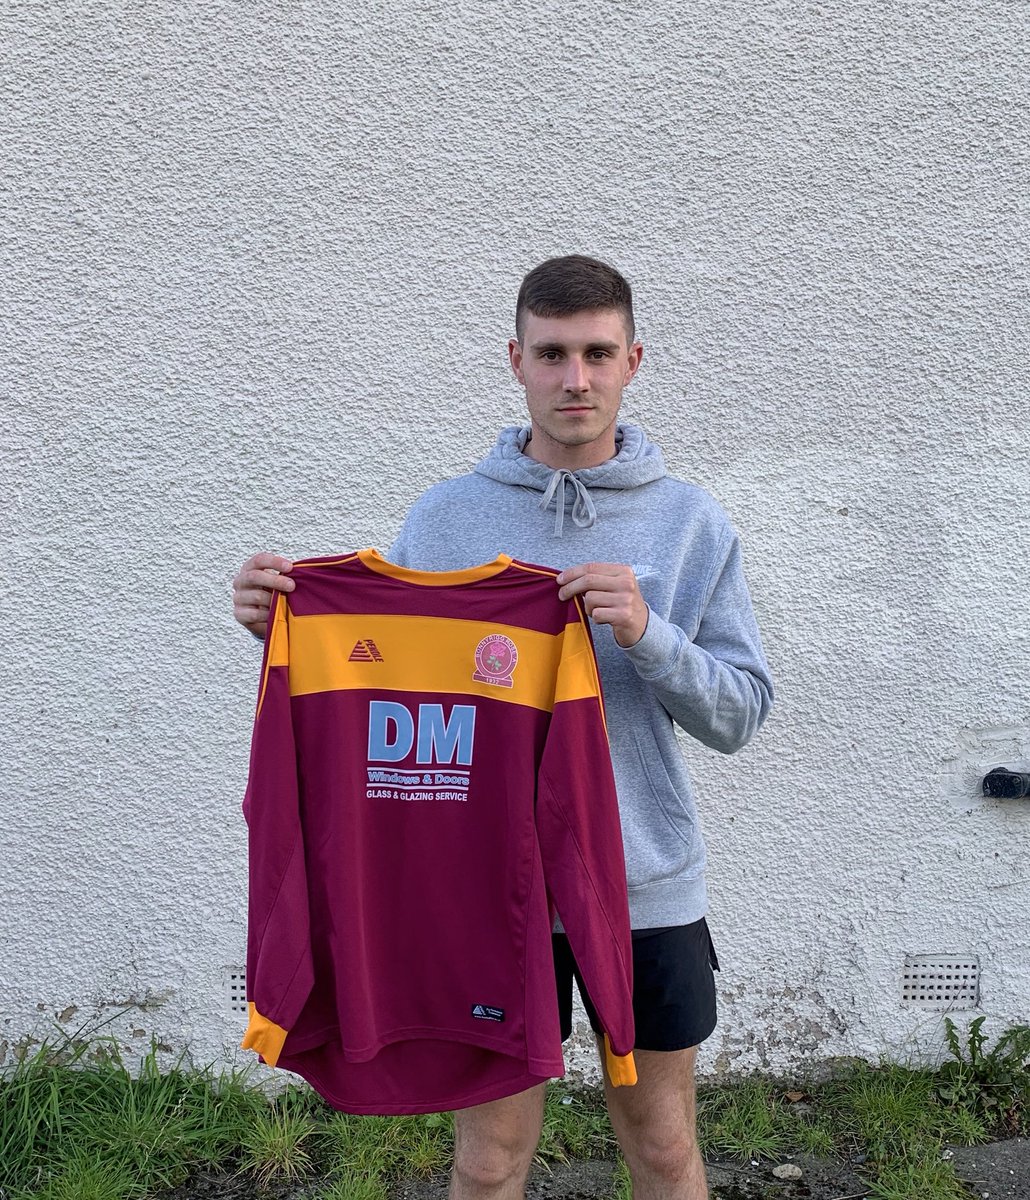 ✍️ We are pleased to announce the signing of Michael Mcfadzean. Mikey is a hard working individual who is capable of playing both centre half and centre midfield. His dominance in the air and in the tackle makes him a very good addition to the squad for this season.